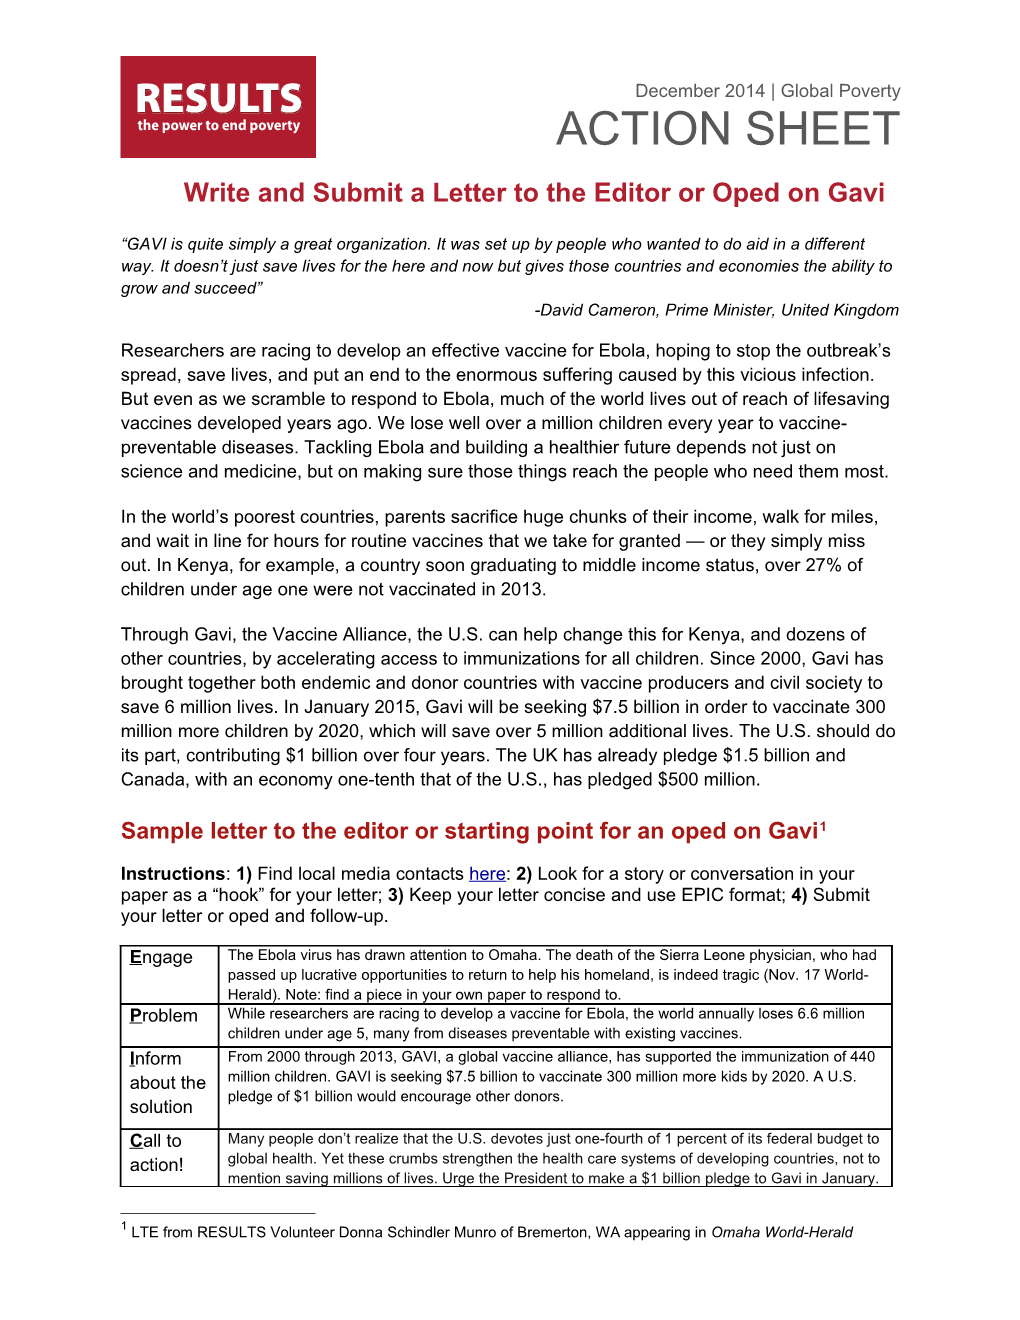 Write and Submit a Letter to the Editor Or Oped on Gavi